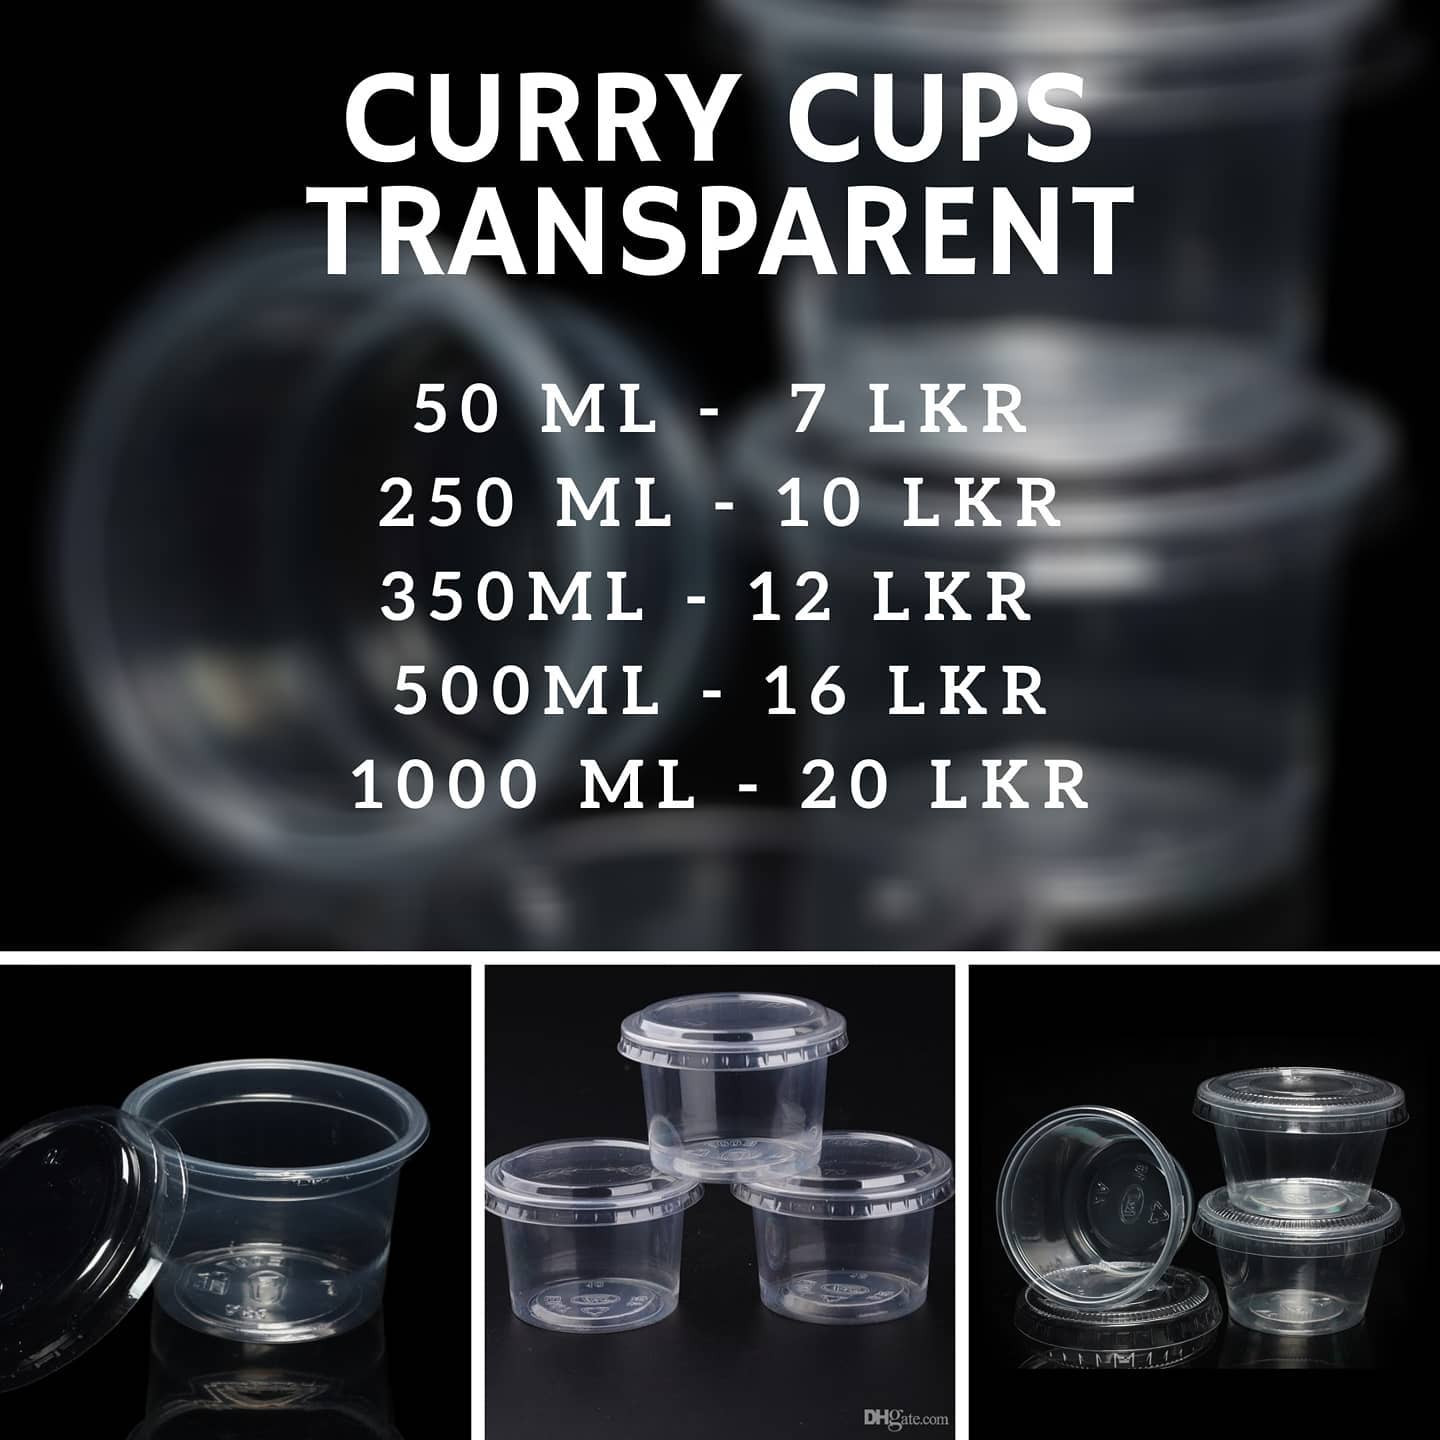 Transparent Curry Cups